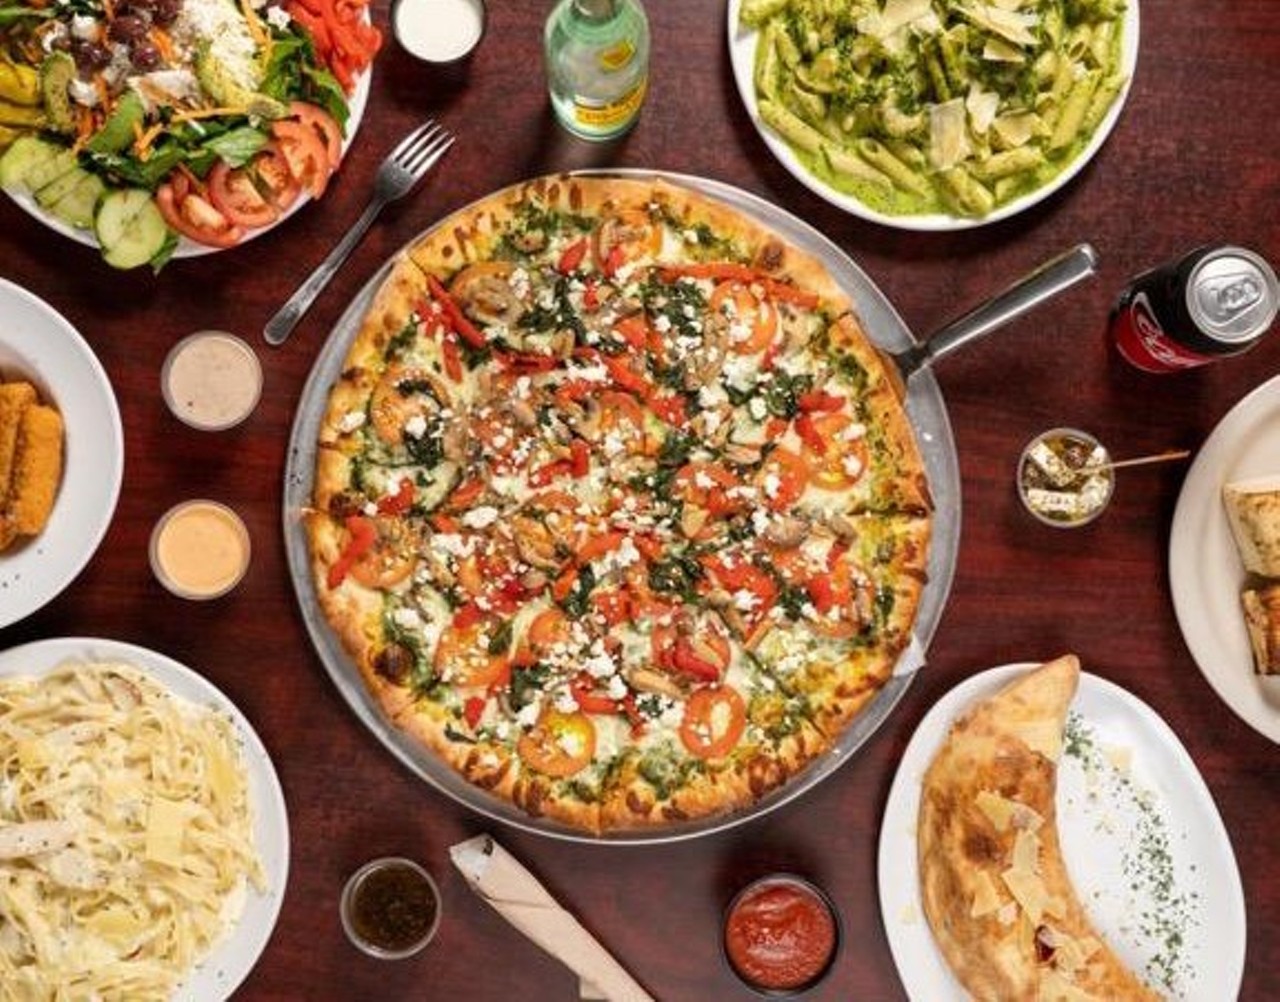 Ali's Pizzaria
5380 Walzem Rd, (210) 616-4849, alispizzaria.com
Try A Build-Your-Own deck oven, white sauce, pesto or traditional pizza via DoorDash, GrubHub and Postmates. Place your order directly via phone call or online ordering to take advantage of daily specials and avoid upcharges from third-party delivery services! 
Photo via Facebook /  
Ali's Pizzeria